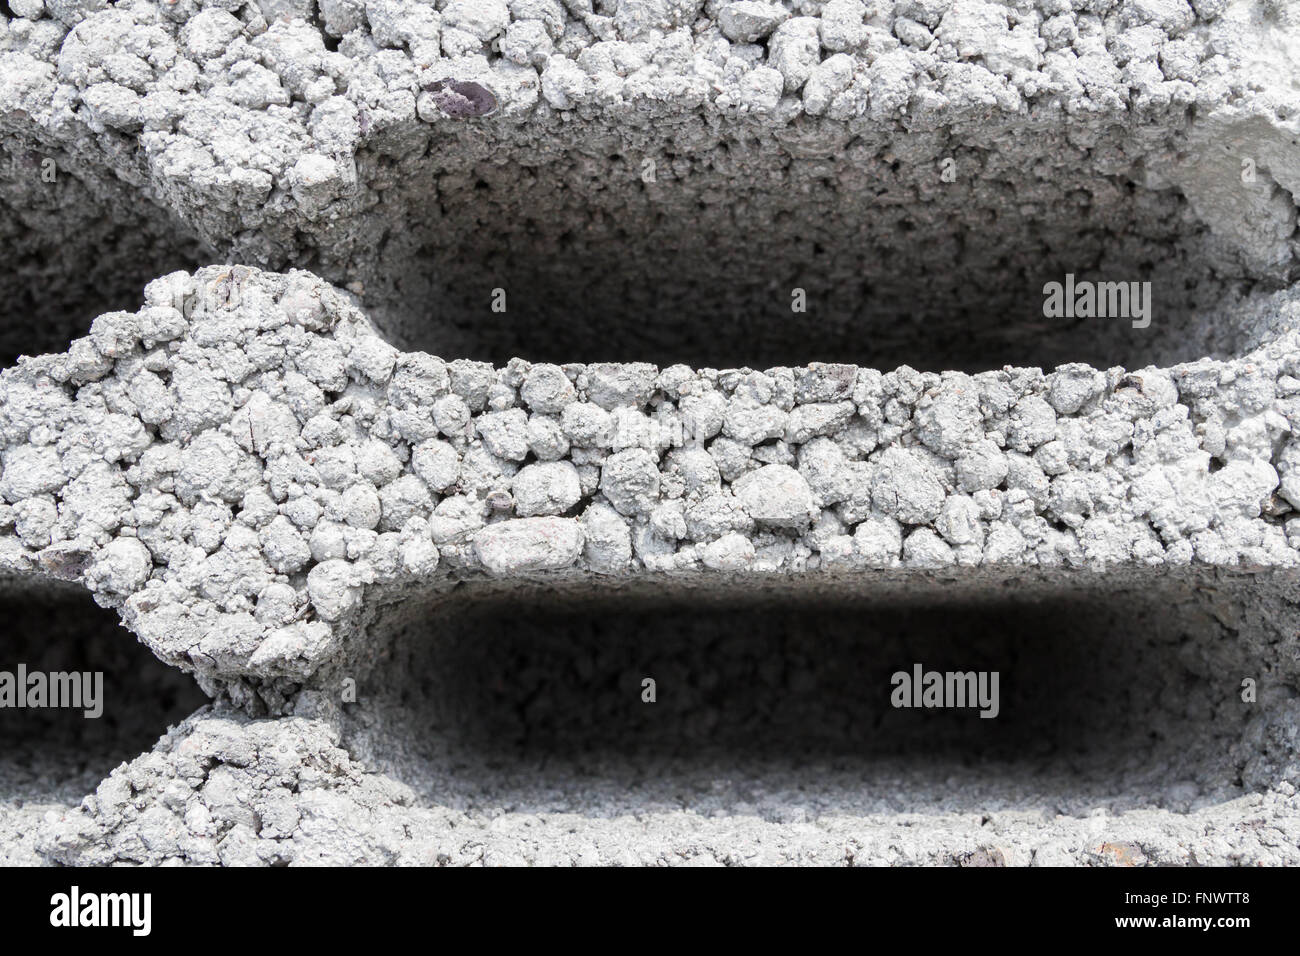 Building materials based on the open construction Stock Photo